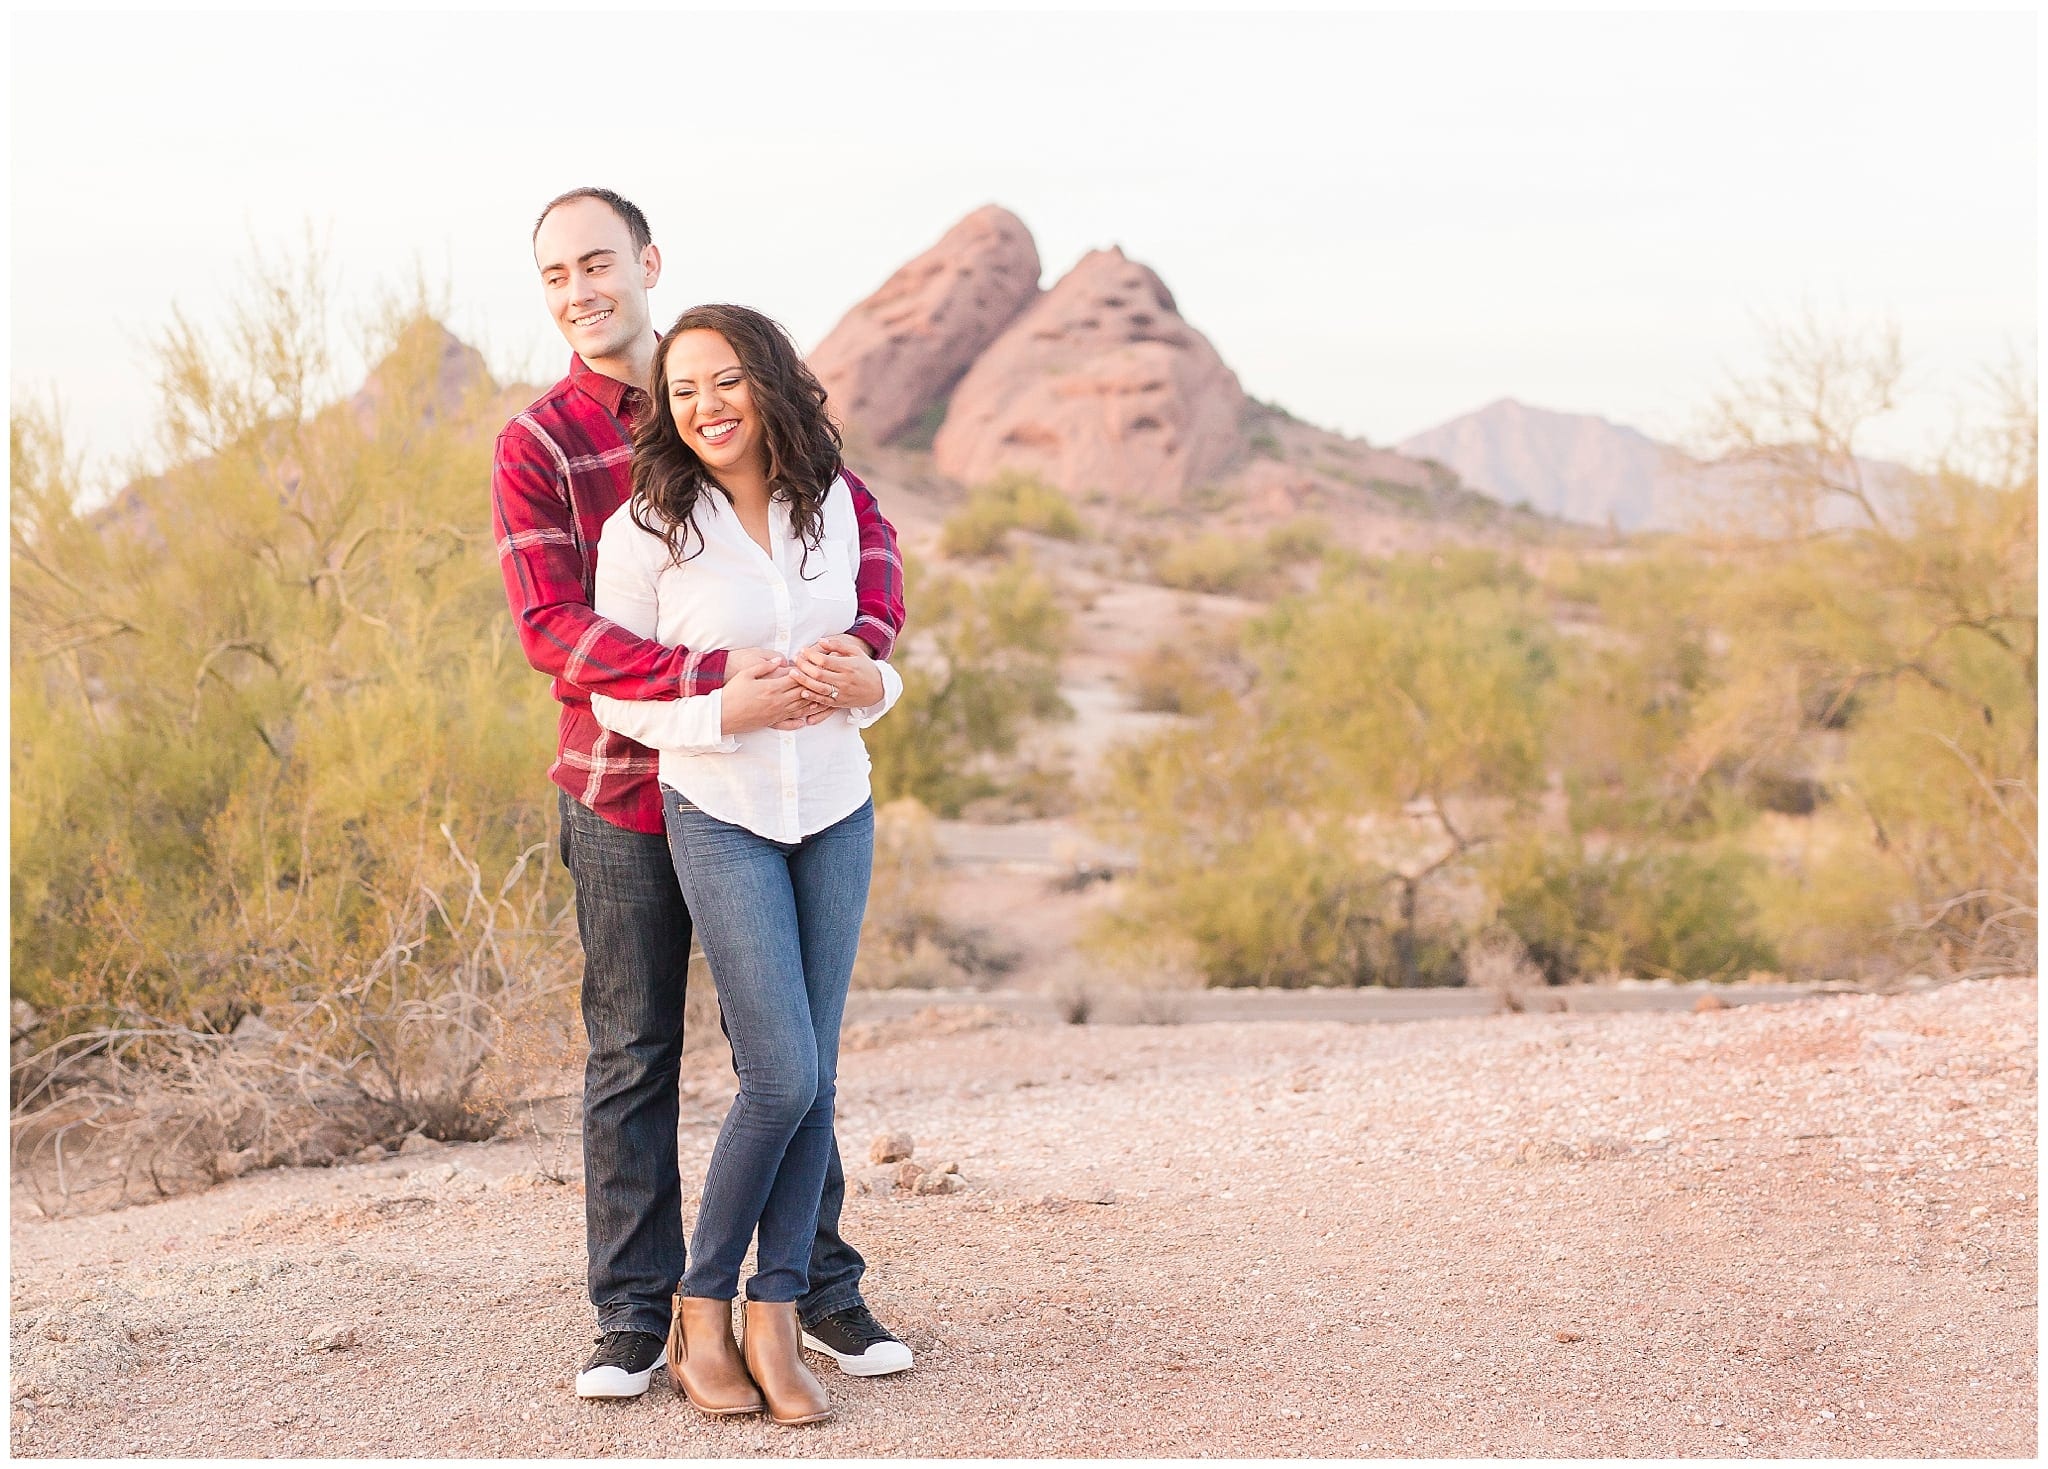 Couple kissing at Papago Park, Red rocks, white shirt, blue jeans, red plaid shirt